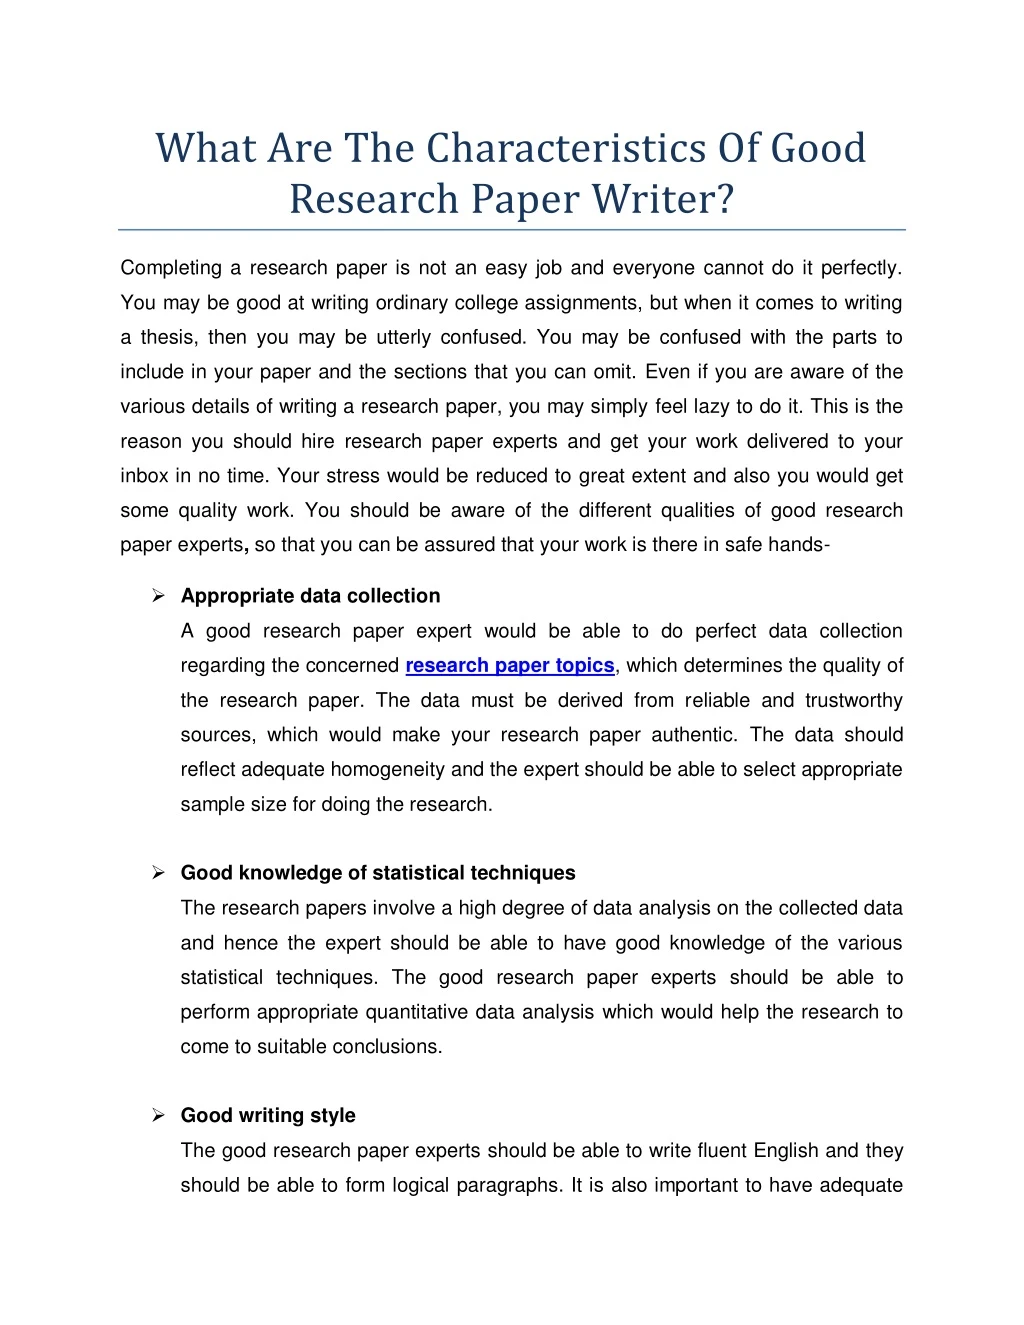 what are the characteristics of good research